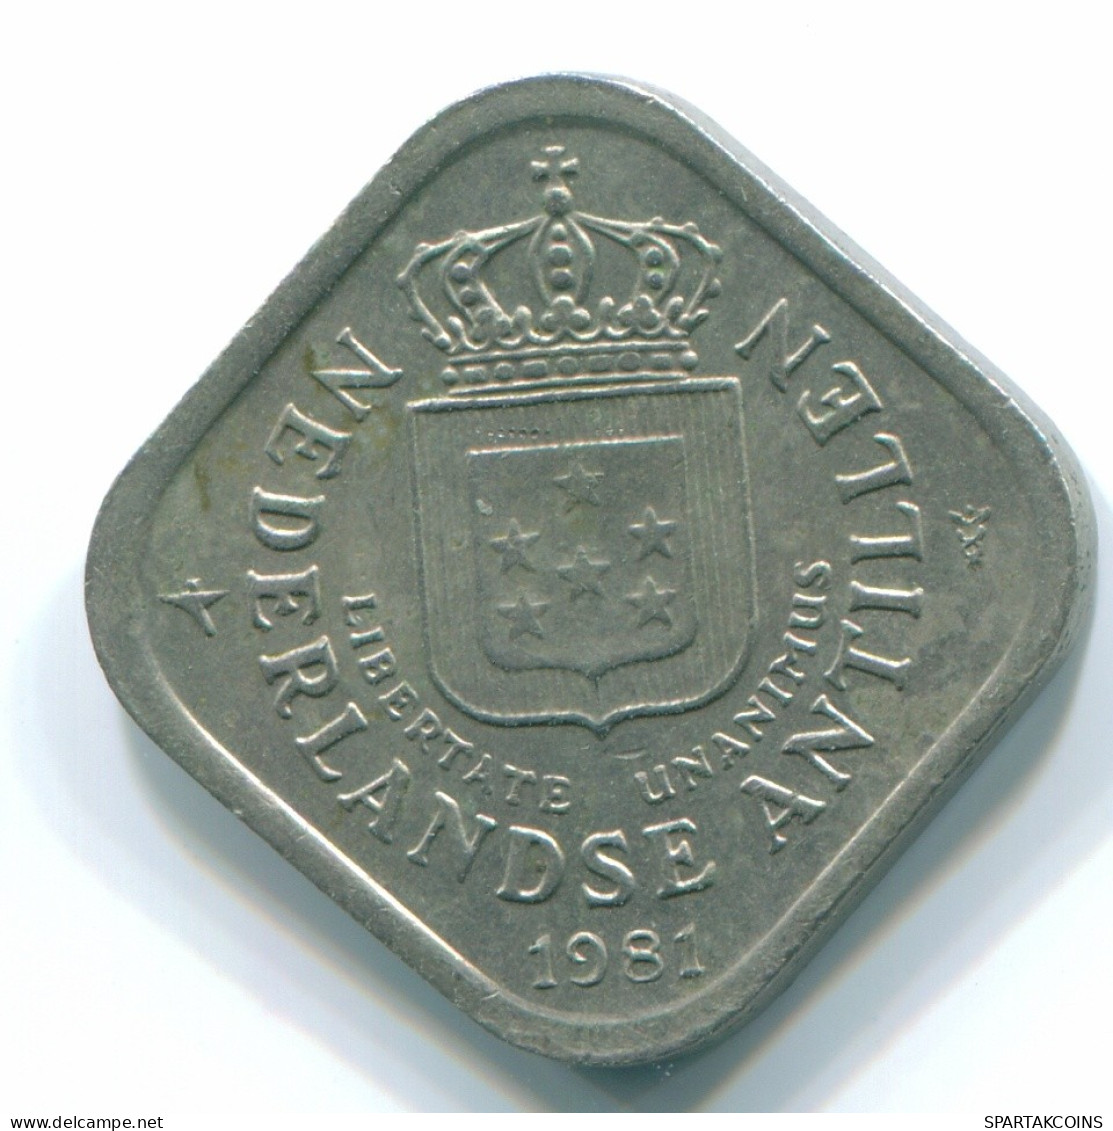 5 CENTS 1981 NETHERLANDS ANTILLES Nickel Colonial Coin #S12345.U.A - Antille Olandesi